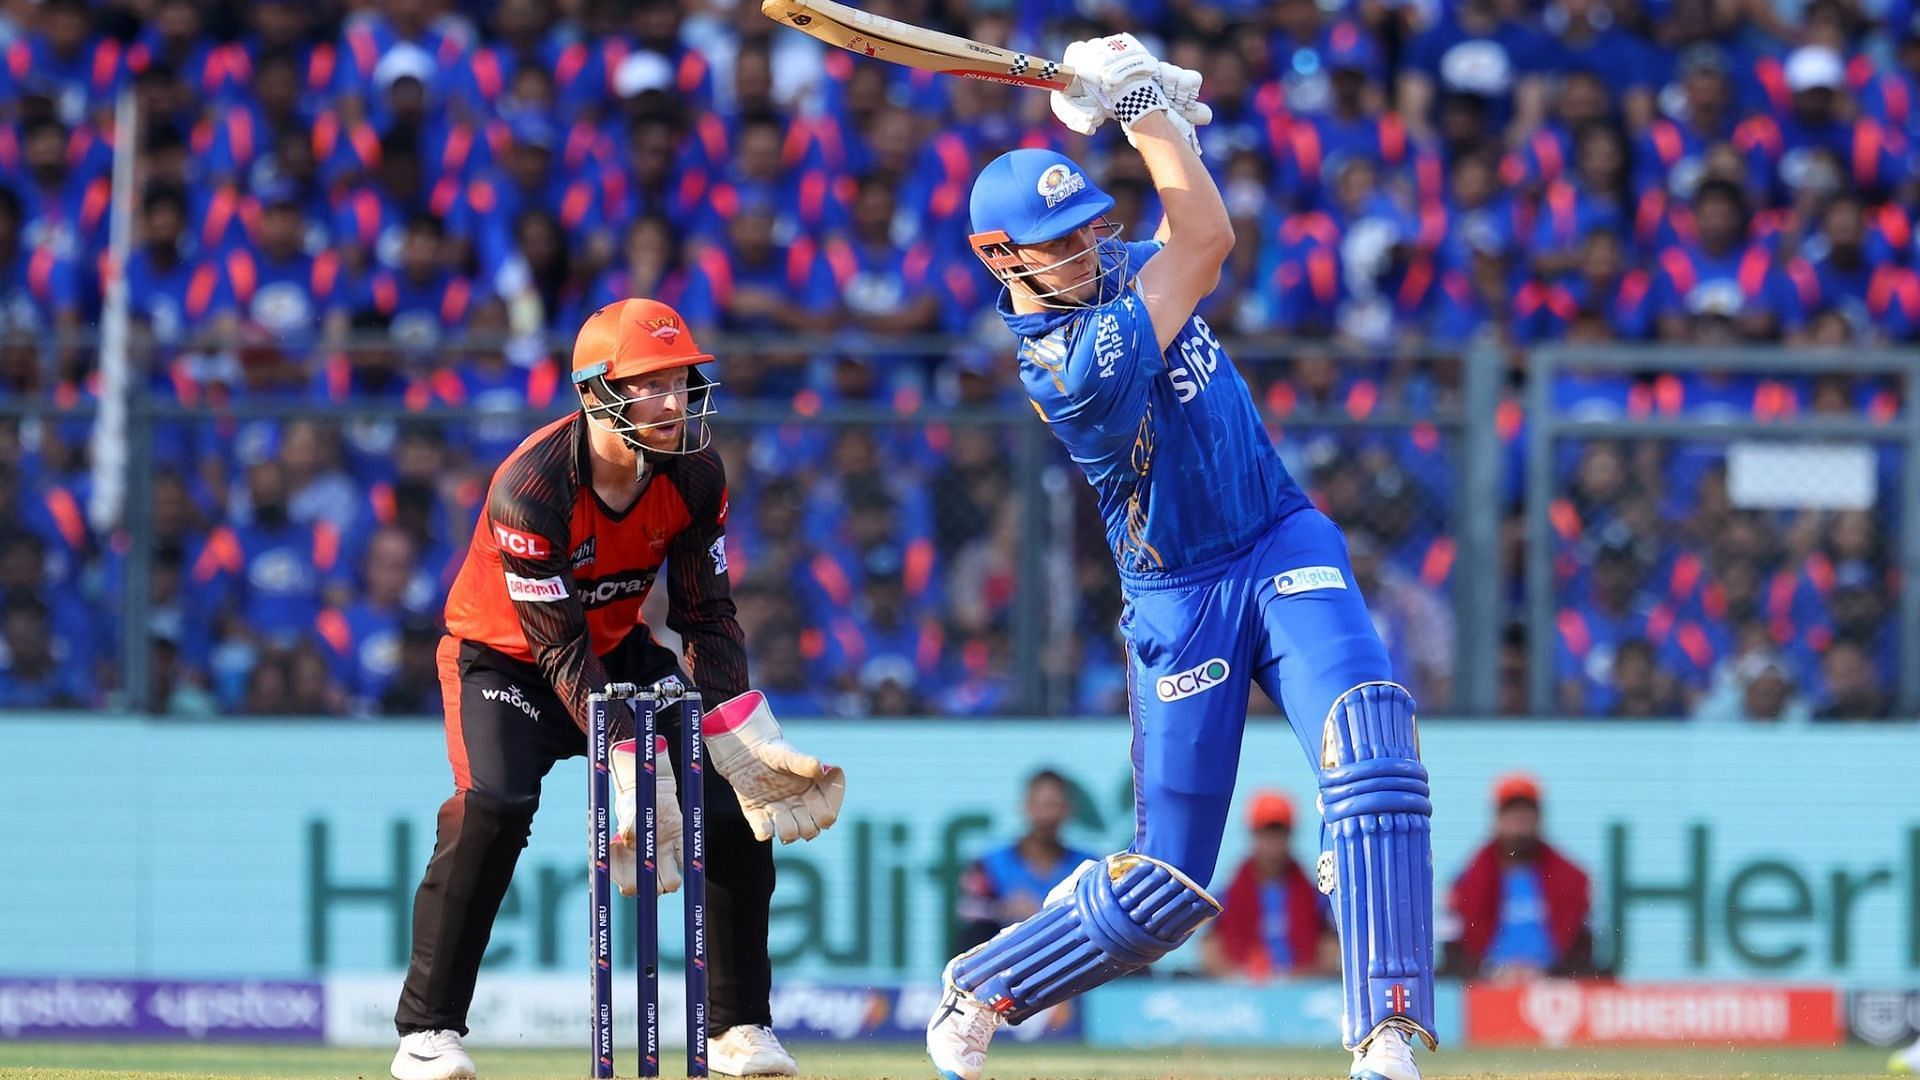 MI secured a dominating victory over SRH in their last game at Wankhede (Image: BCCI/IPL)